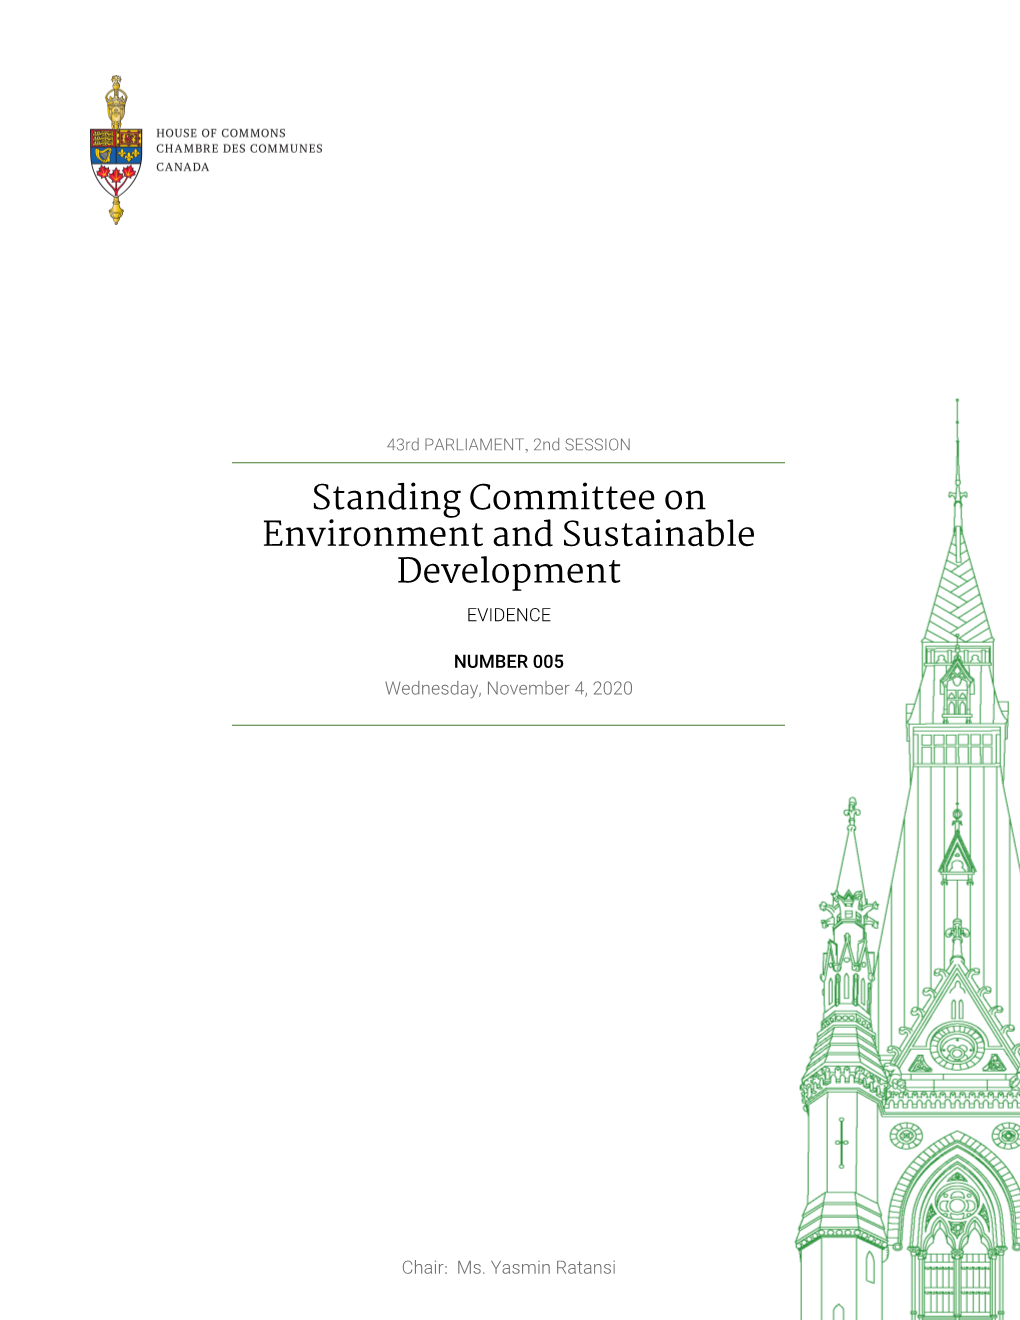 Evidence of the Standing Committee on Environment And